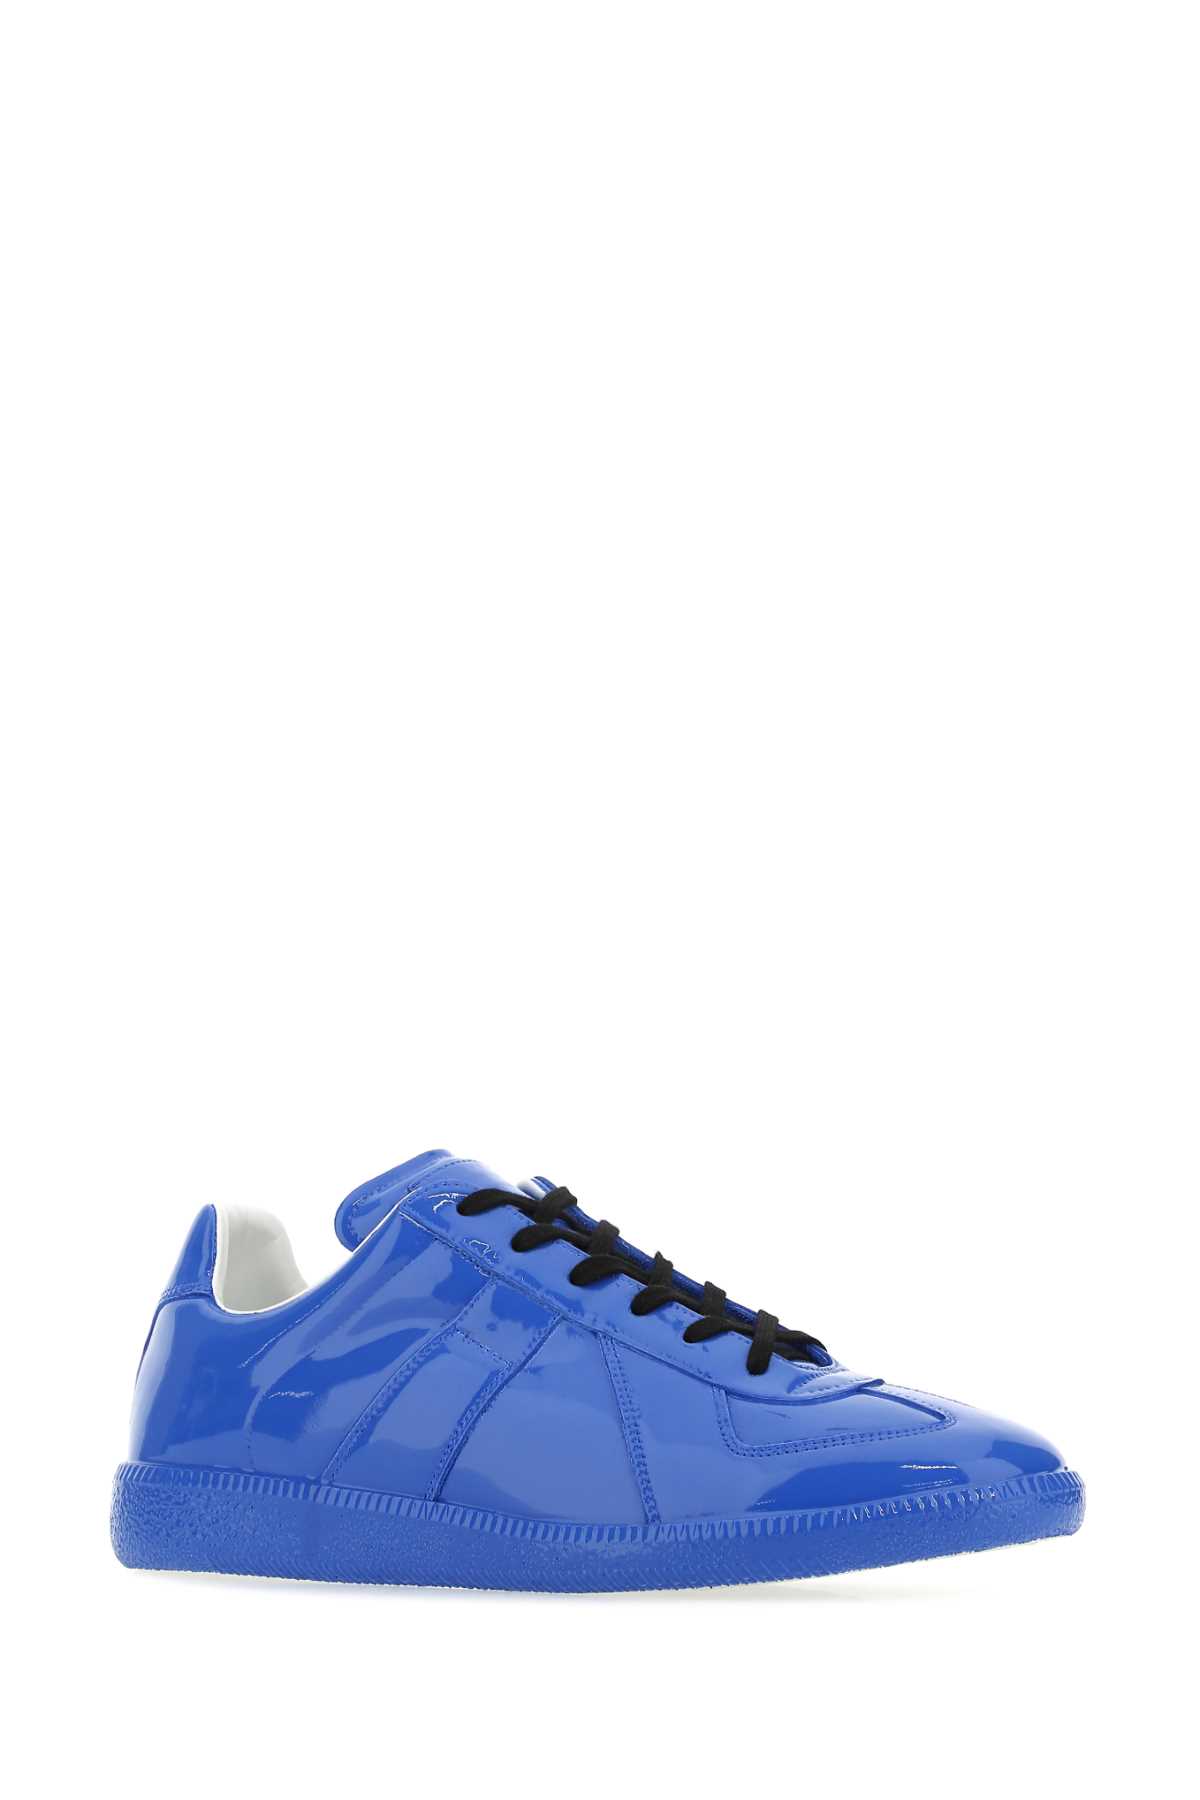 Maison Margiela Electric Blue Leather Replica Trainers In T6046